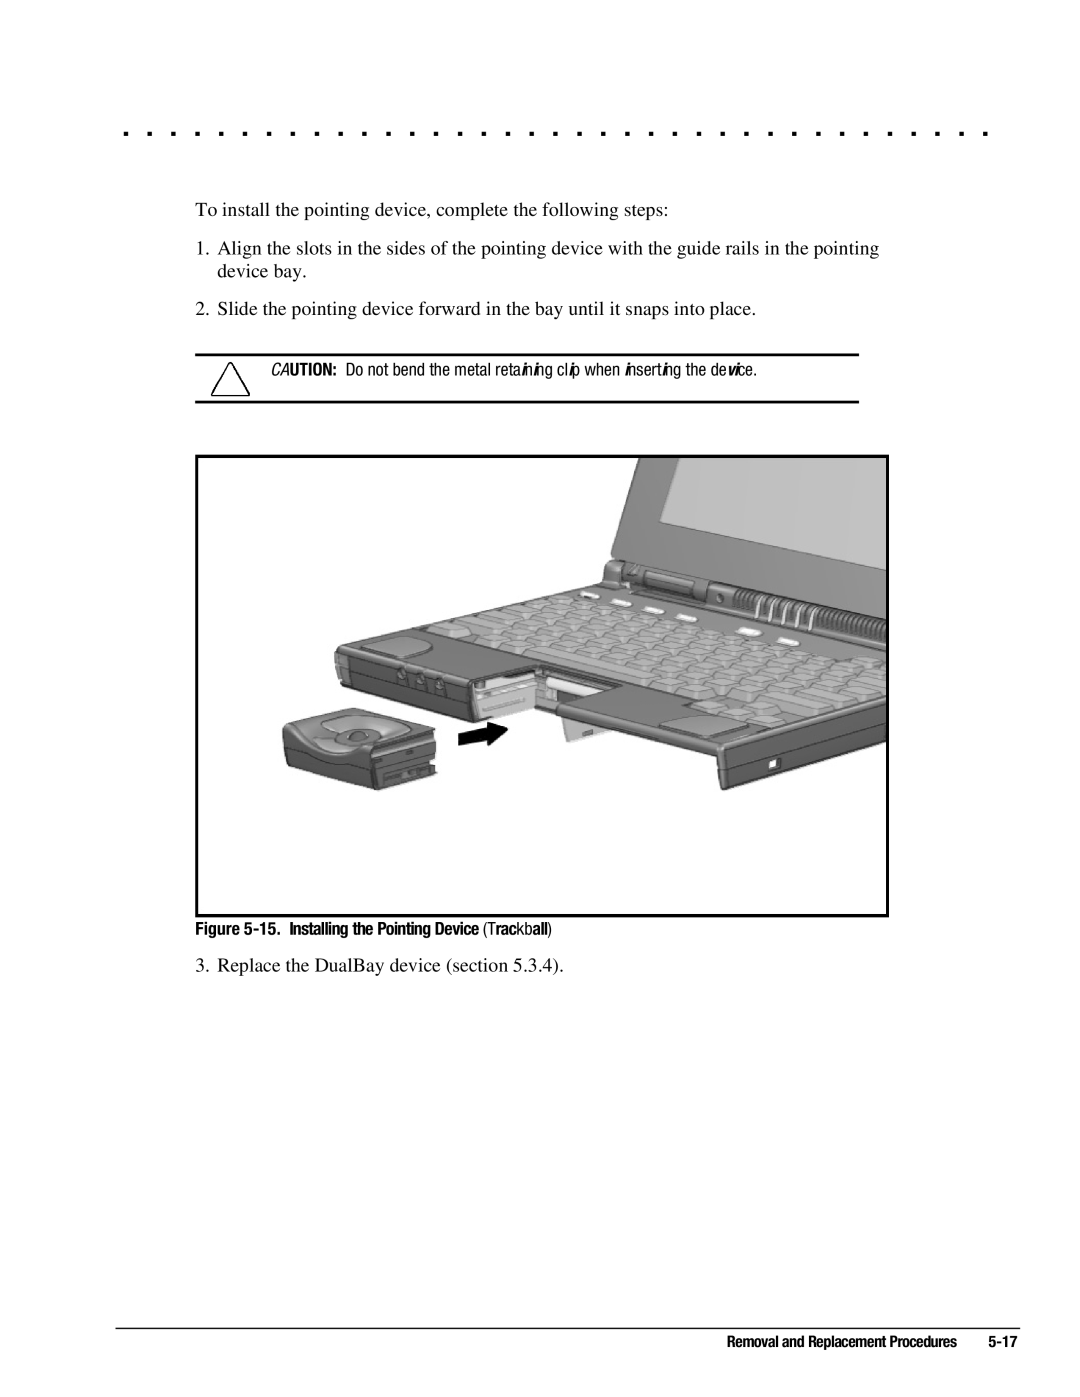 Compaq 4160T, 4130T, 4150T, 4140T, 4131T, 4200, 4125T, 4120, 4125D To install the pointing device, complete the following steps 